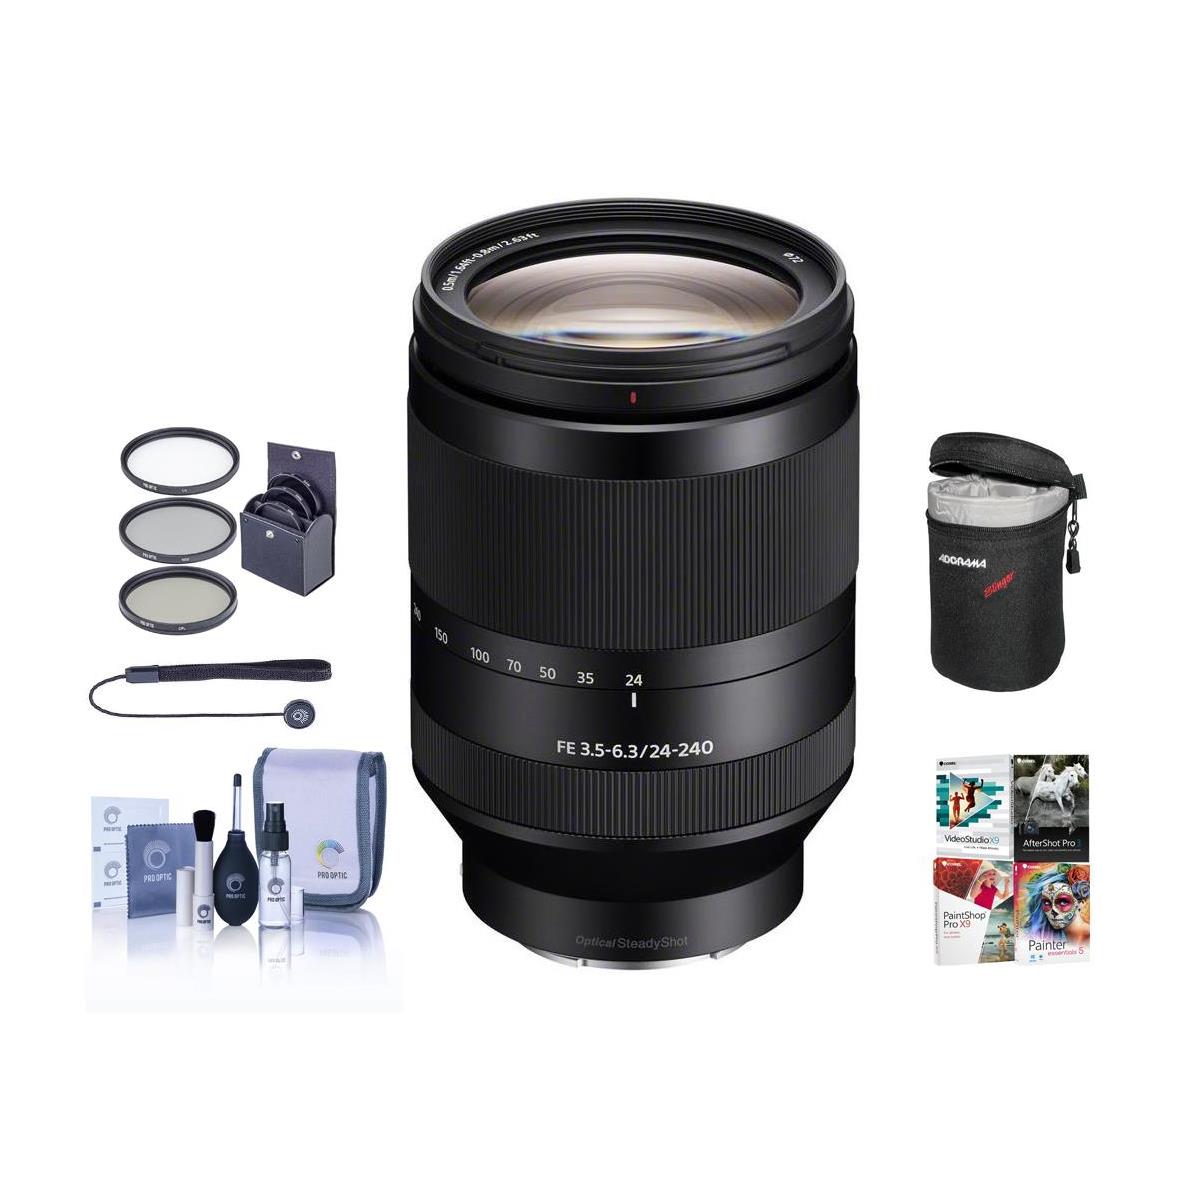 

Sony FE 24-240mm f/3.5-6.3 OSS Lens for Sony E with Free Accessories Kit